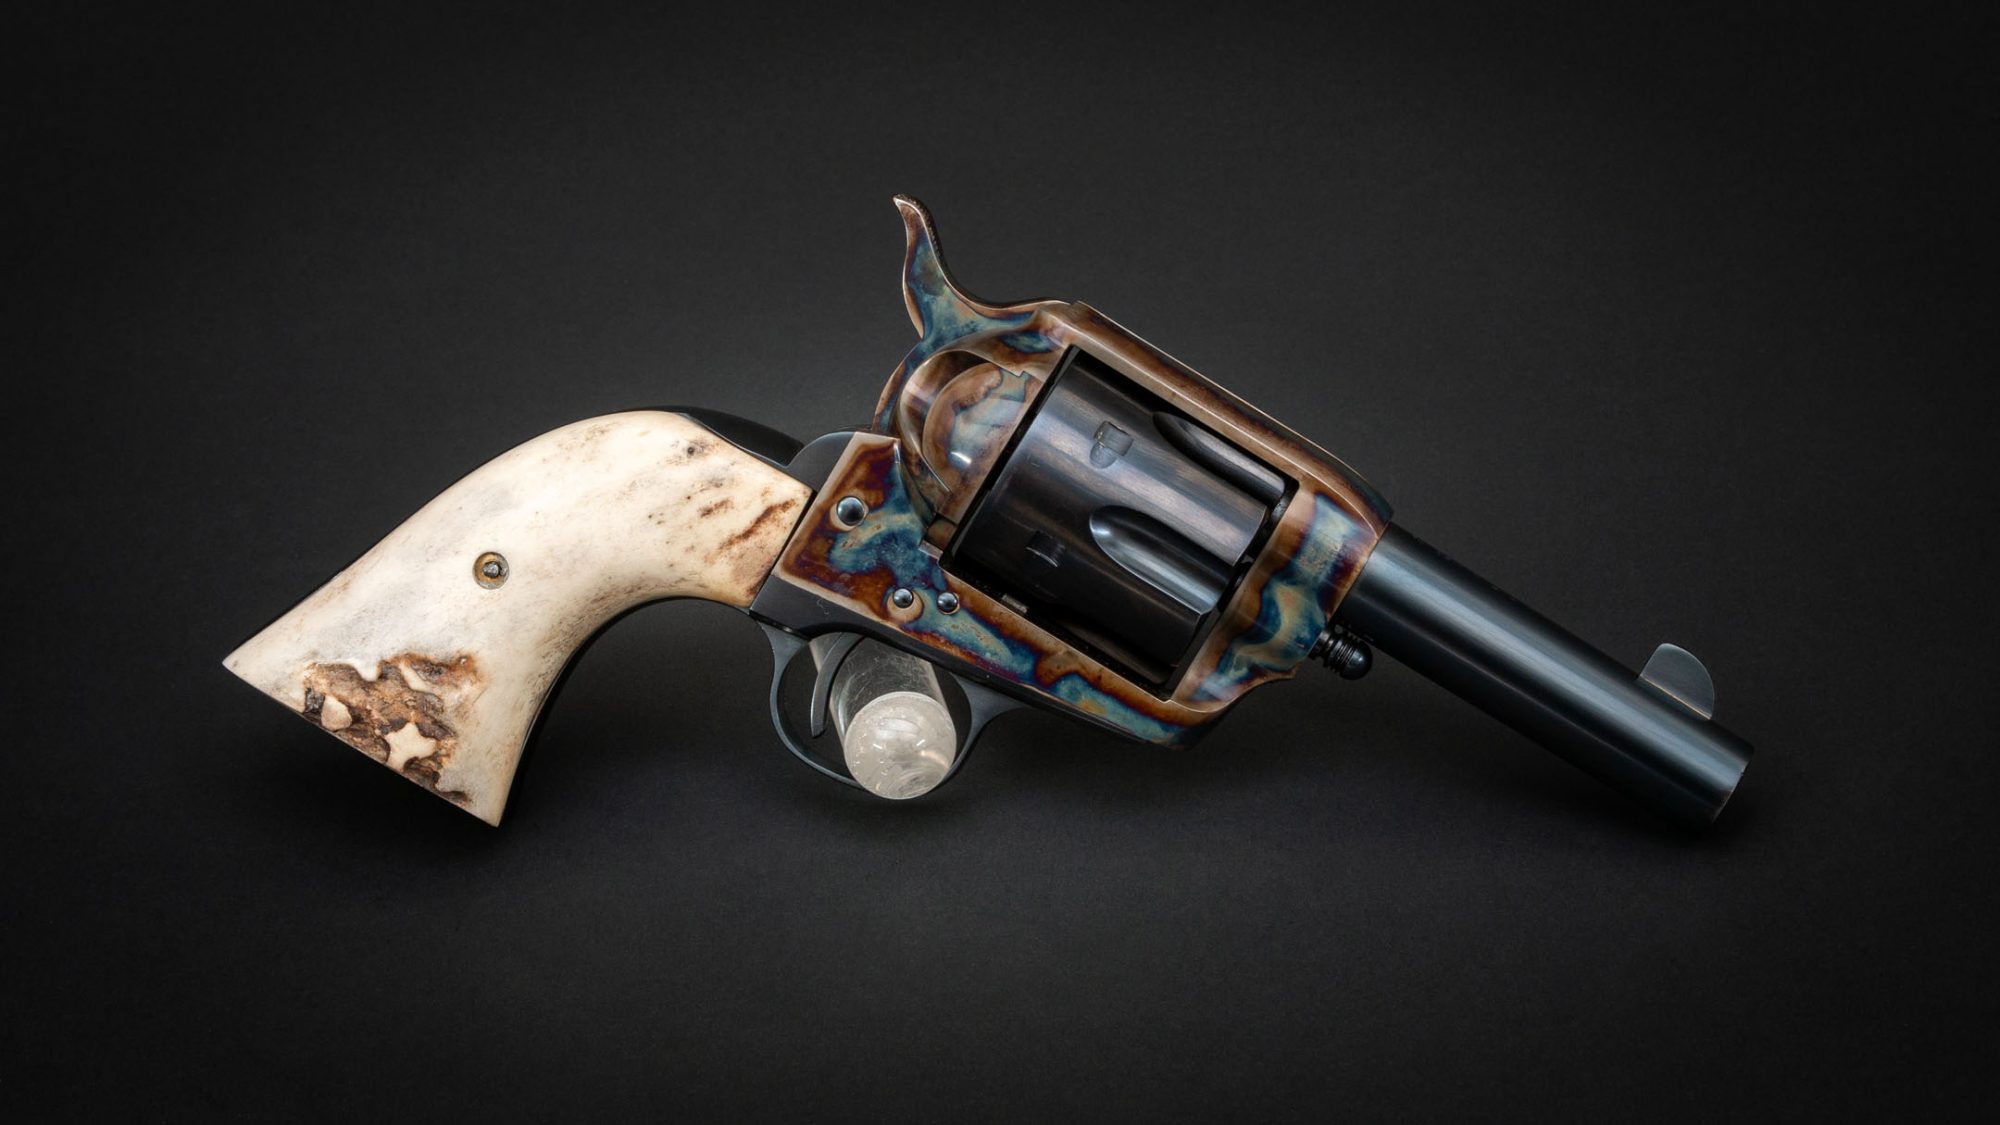 U.S. Fire Arms Single Action revolver in .45 Colt, for sale by Turnbull Restoration Co. of Bloomfield, NY